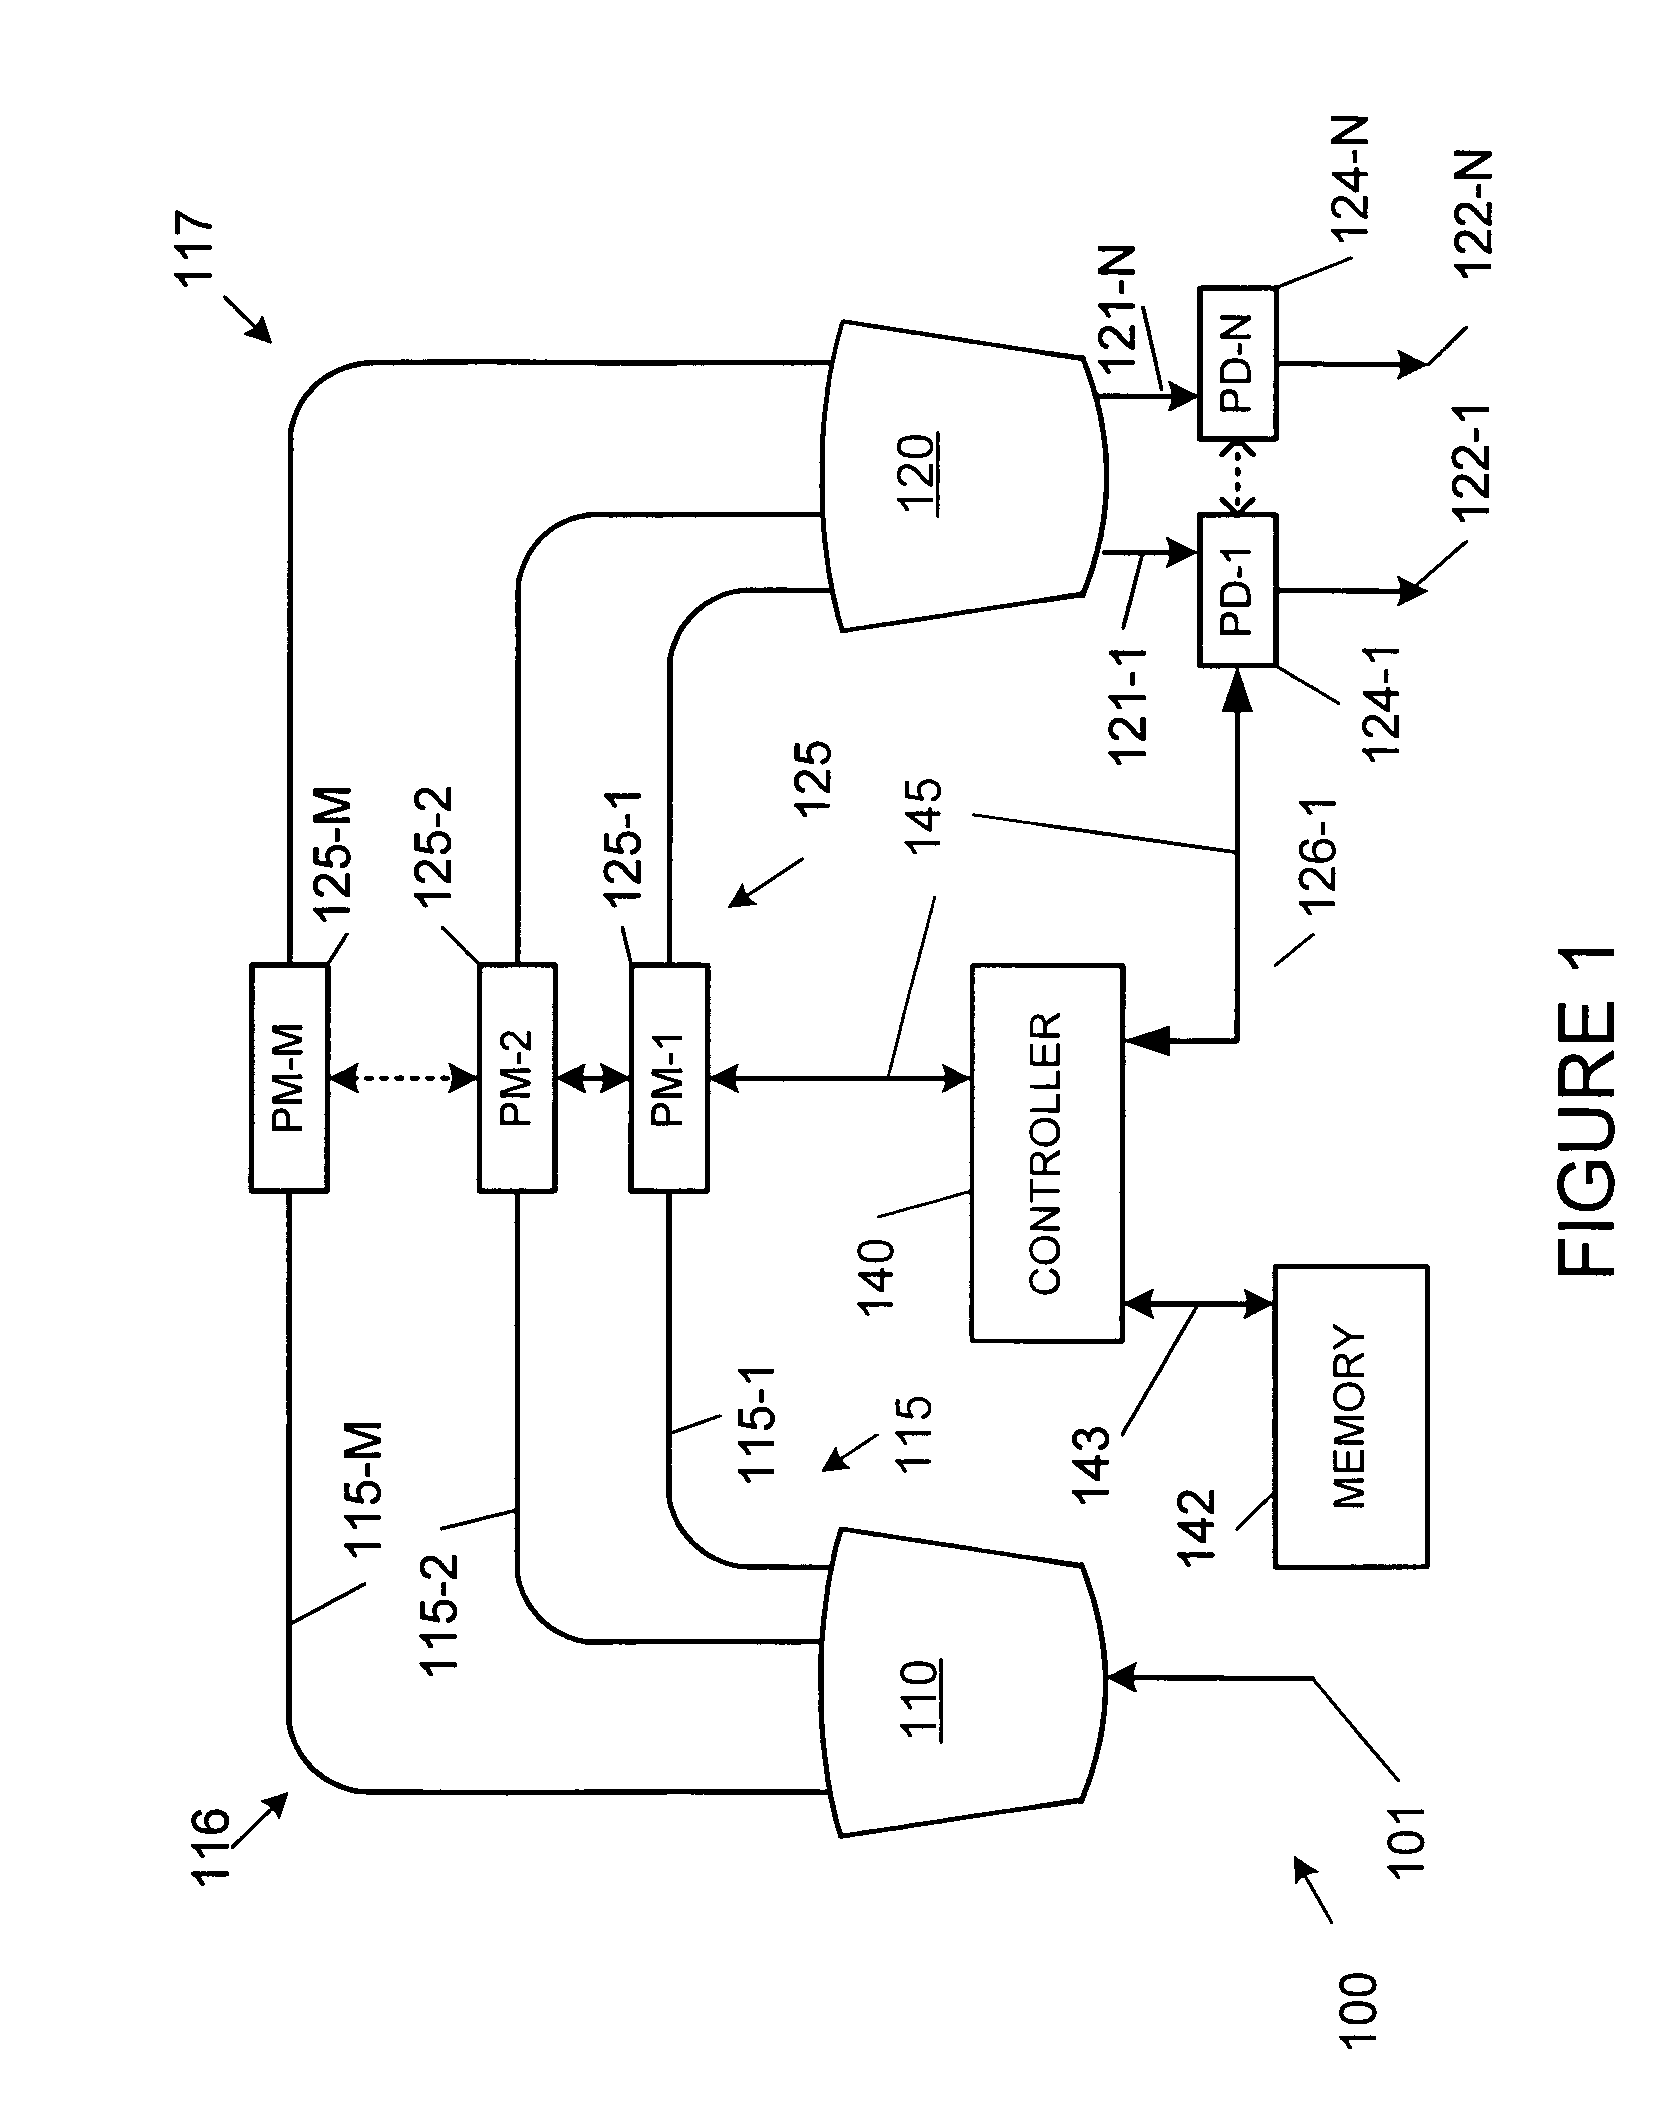 Electronically controllable arrayed waveguide gratings